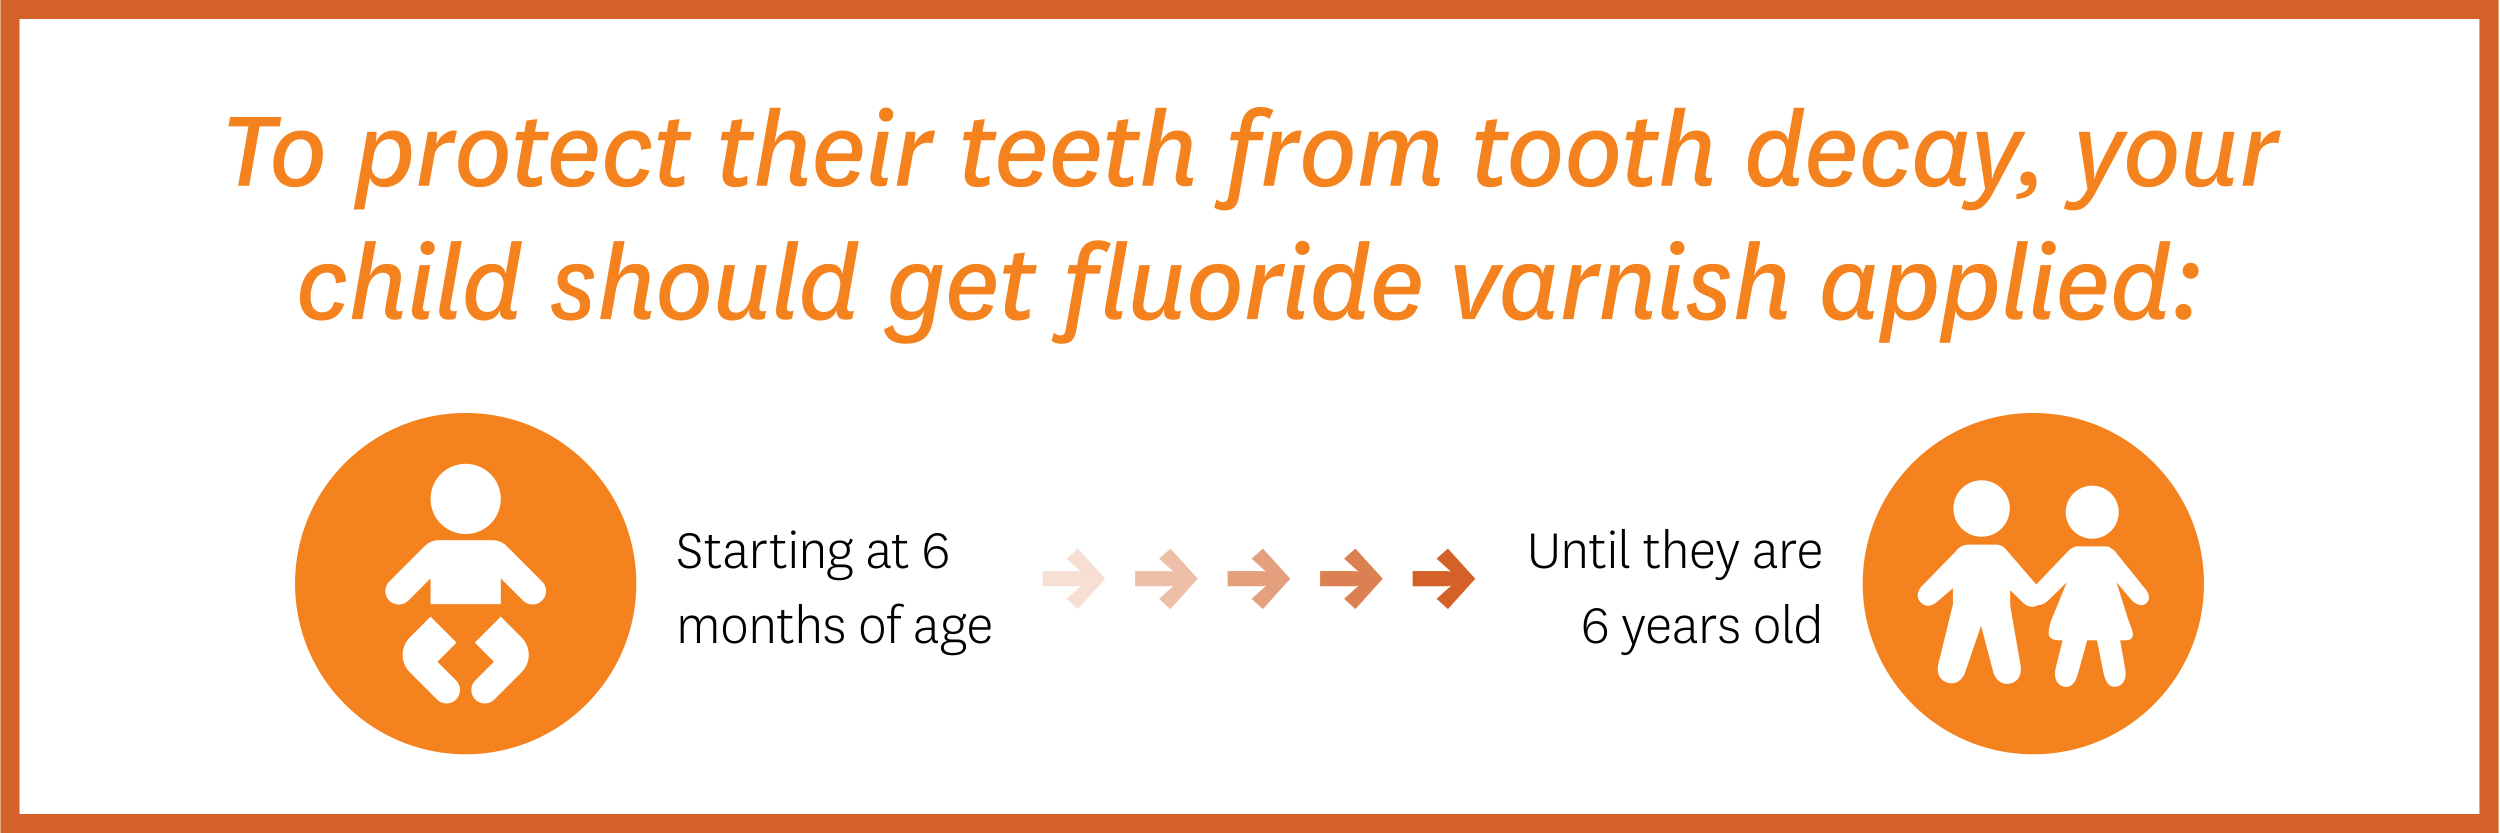 To protect their teeth from tooth decay, your child should get fluoride varnish applied starting at 6 months of age until they  are 6 years old.